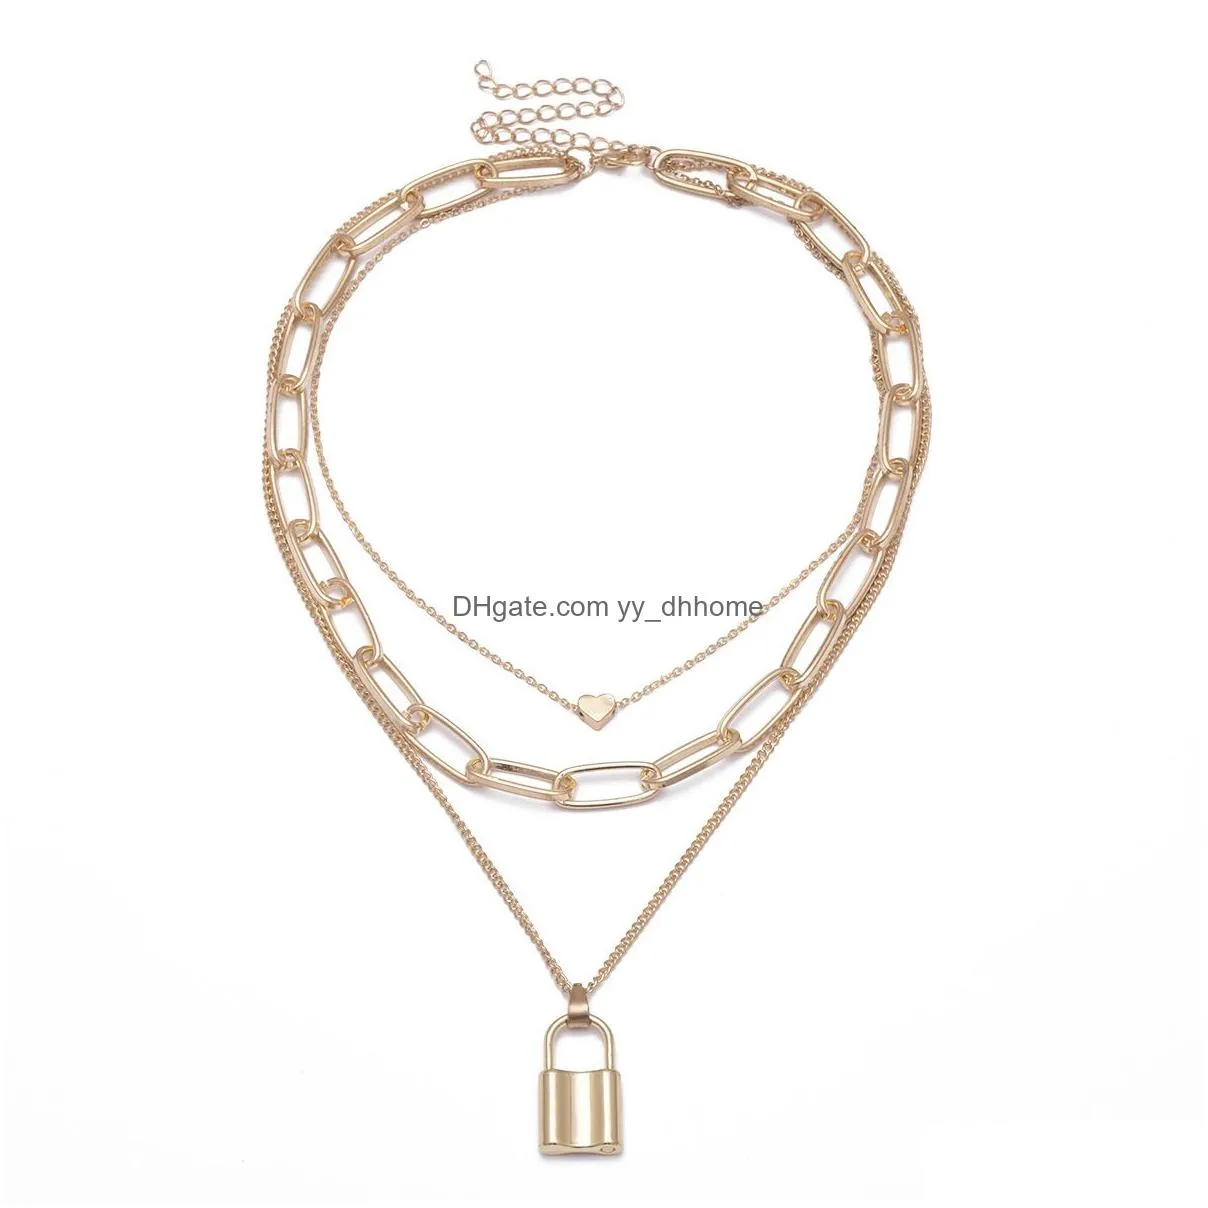 gold chains heart lock necklace chokers multi layer collar necklaces women hip hop fashion jewelry will and sandy gift